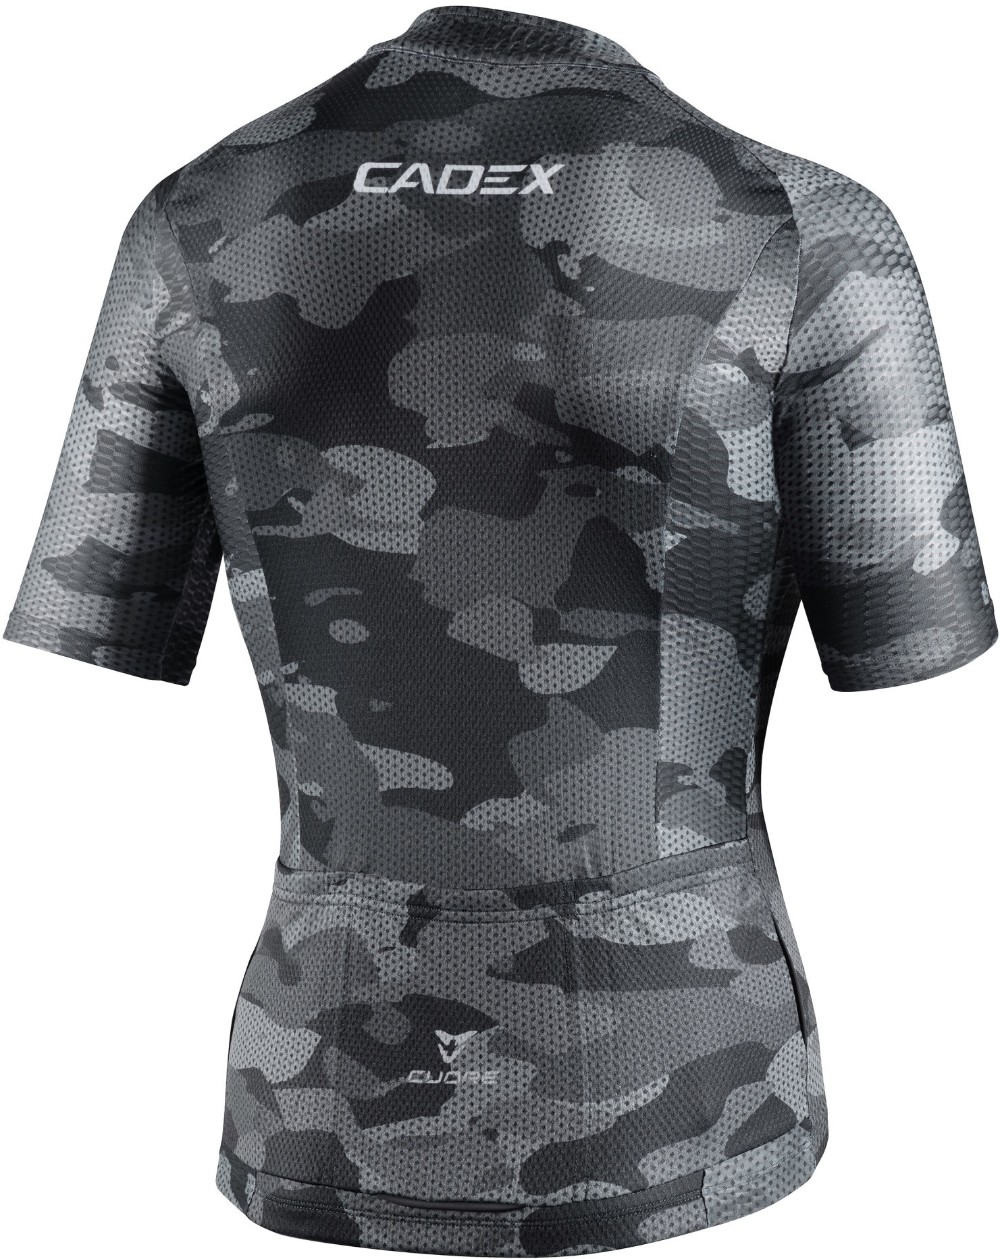 Silver Short Sleeve Jersey image 1